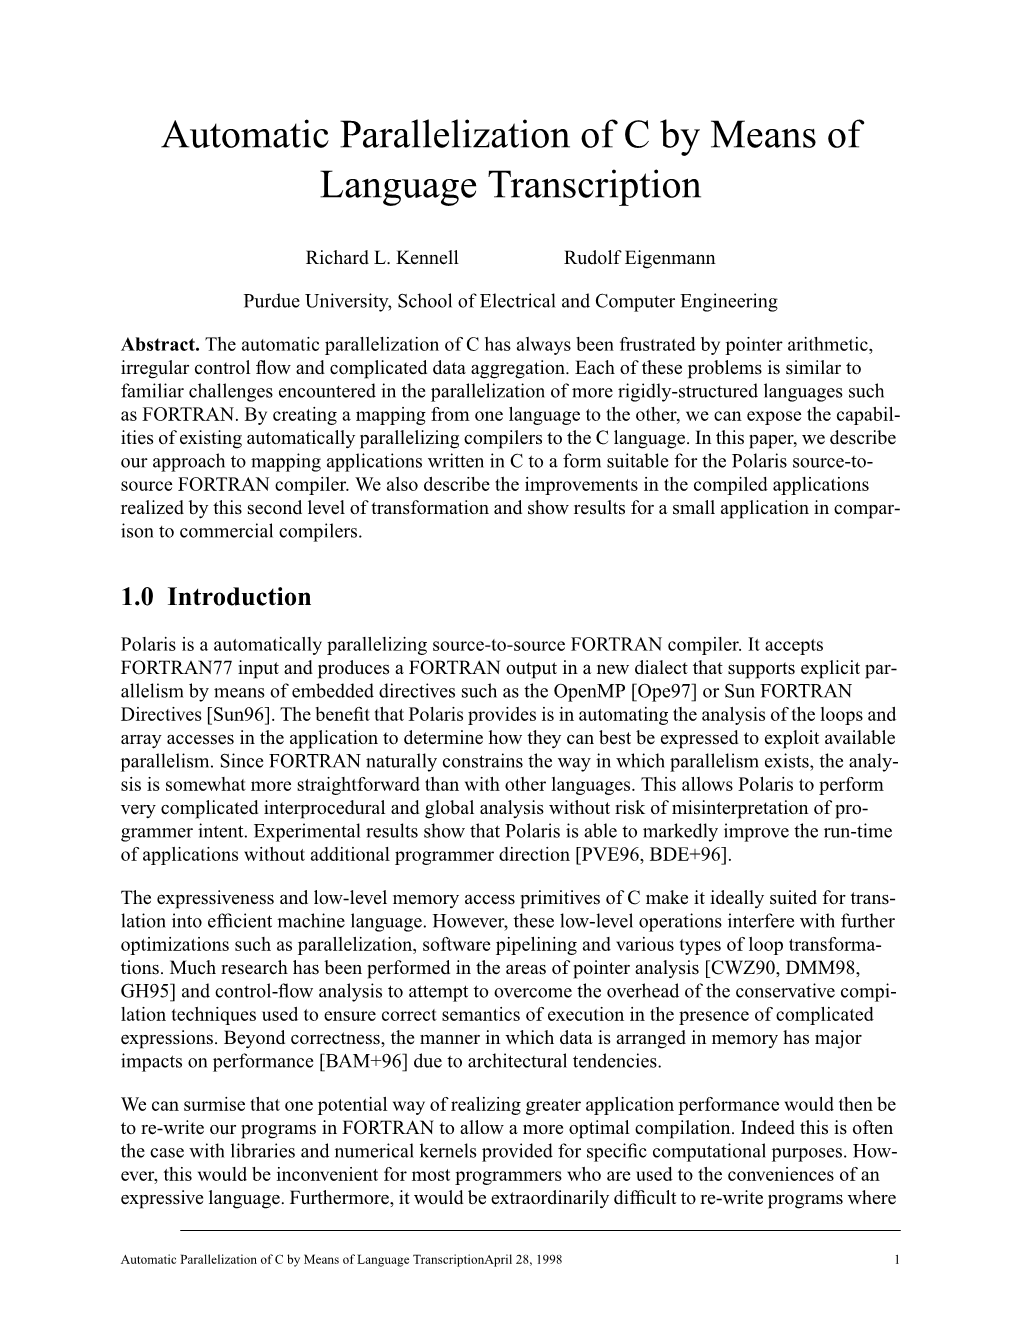 Automatic Parallelization of C by Means of Language Transcription